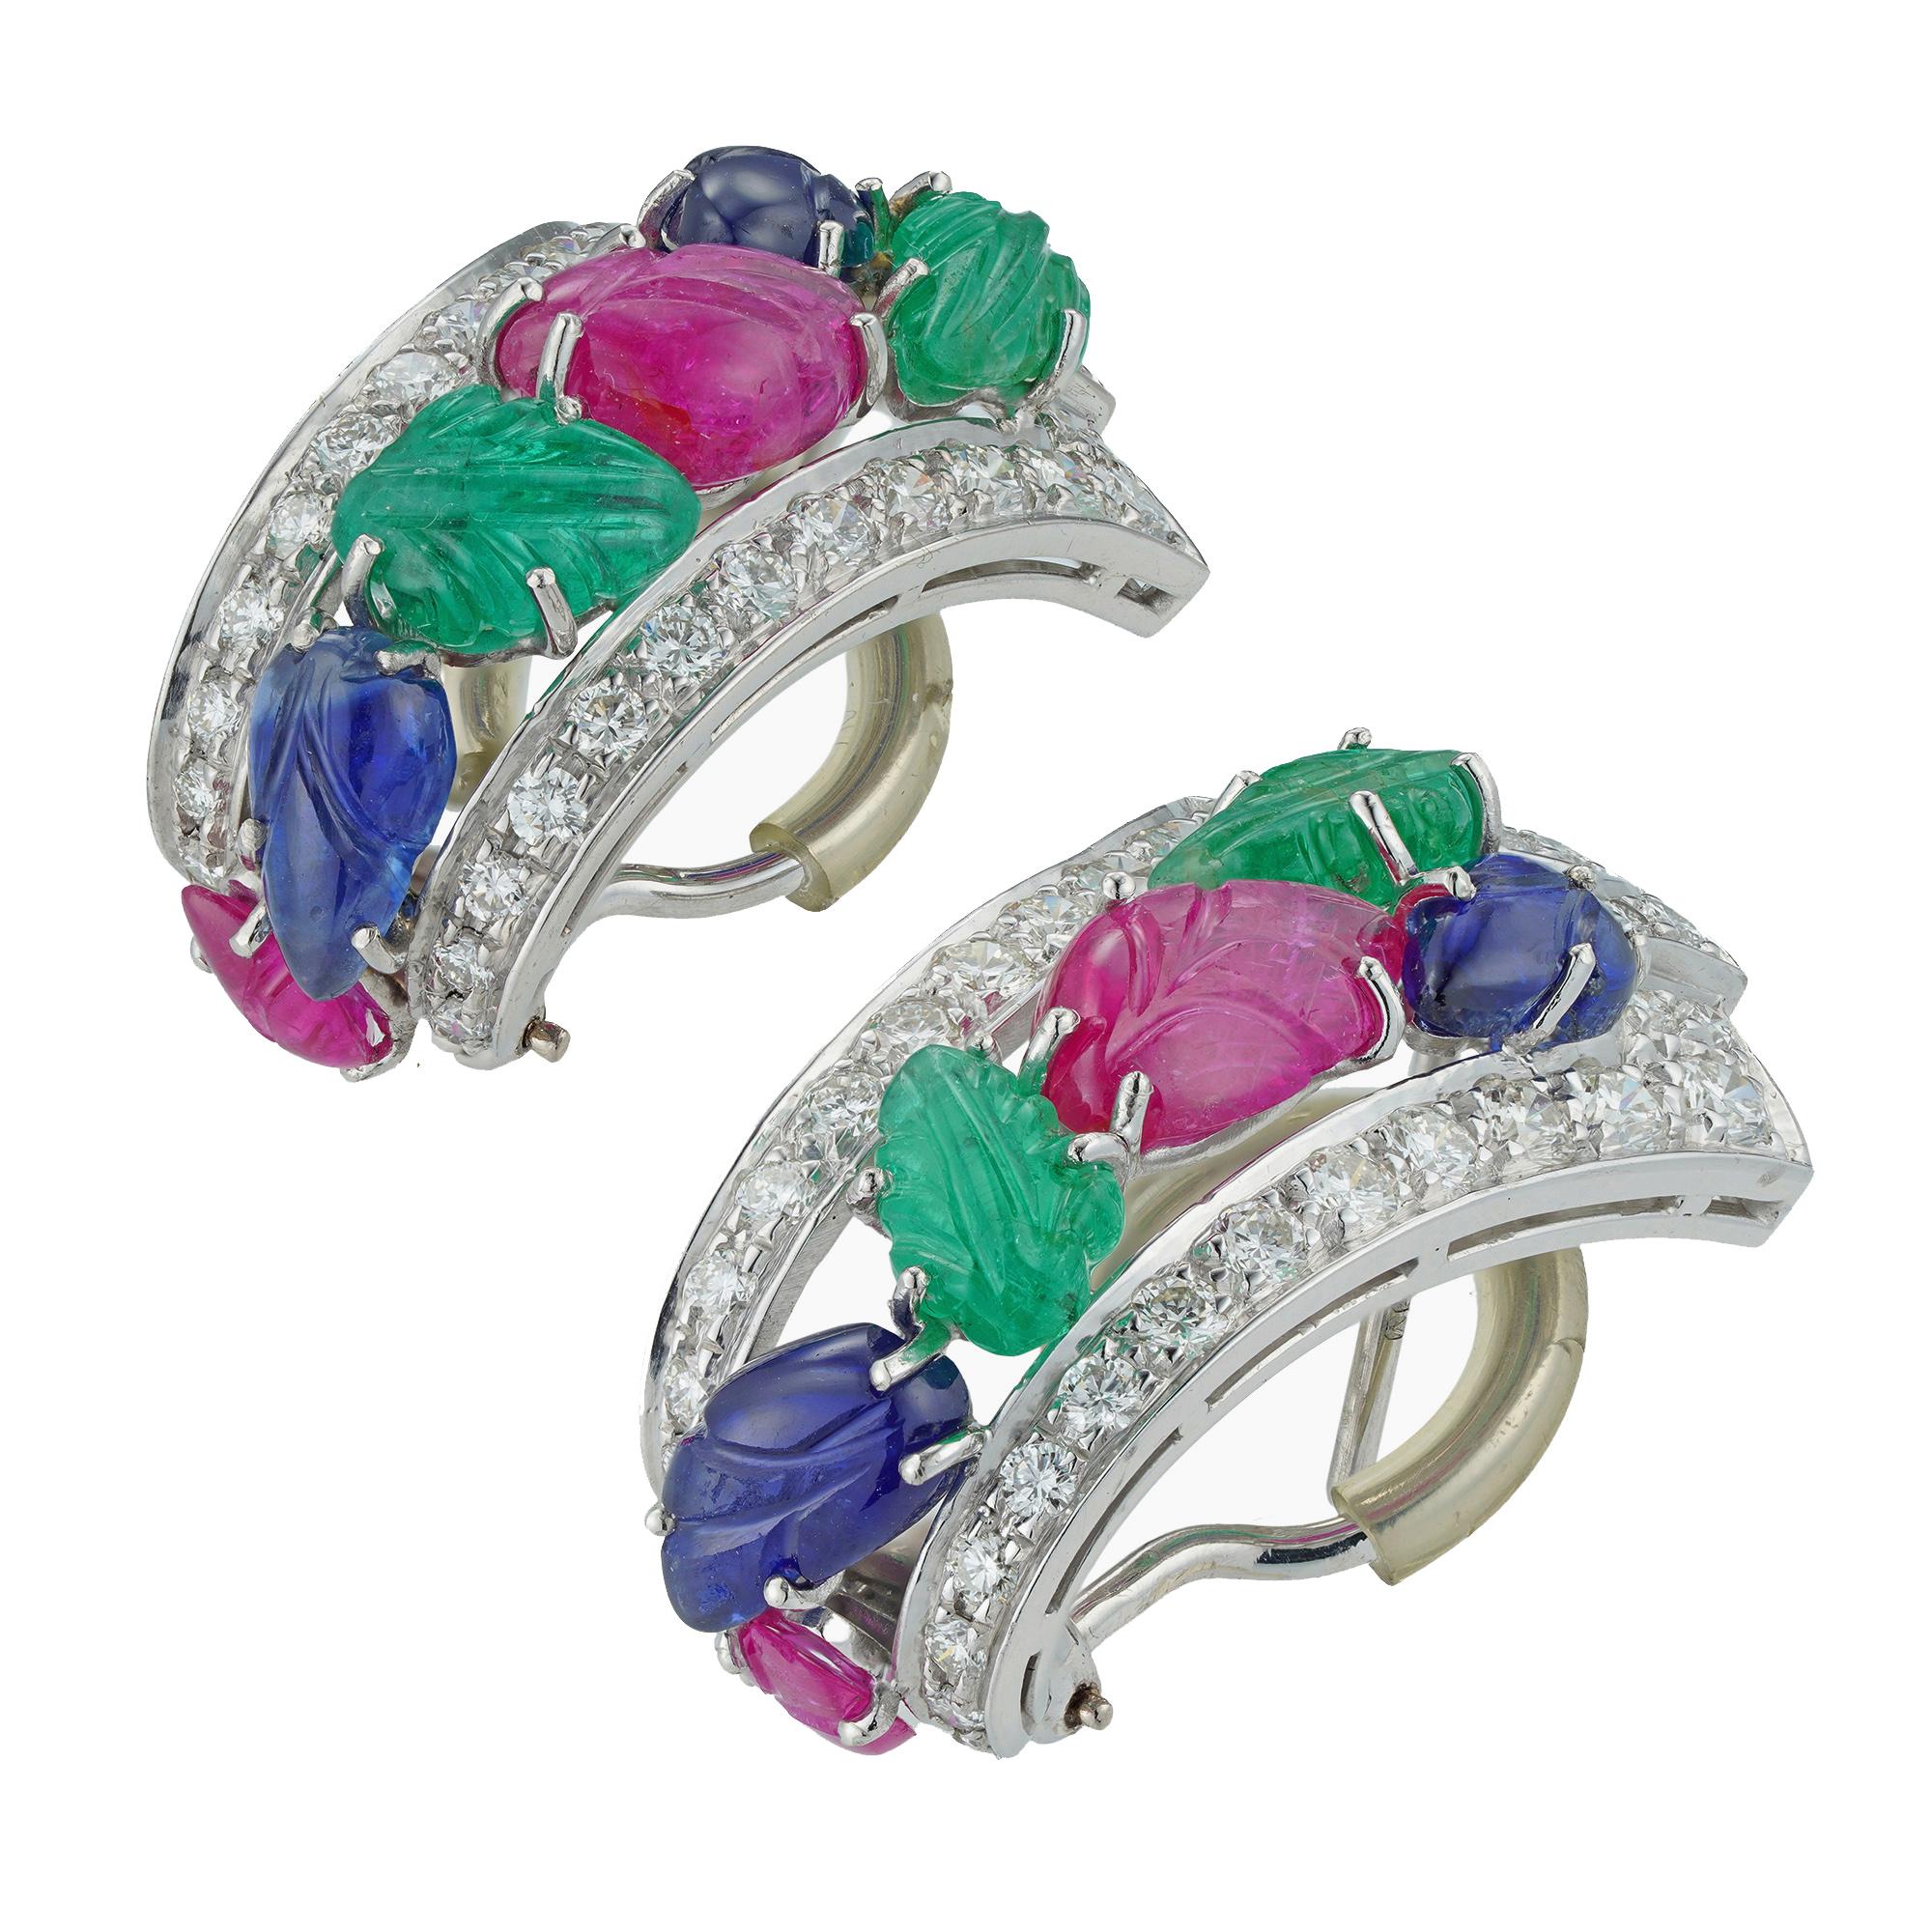 A pair of mid-20th century tutti-frutti clip earrings, each clip with a diamond-set frame of geometric design, grain-set with round brilliant-cut diamonds estimated to weigh 2.5 carats in total, to the centre with two emerald, two sapphire and two